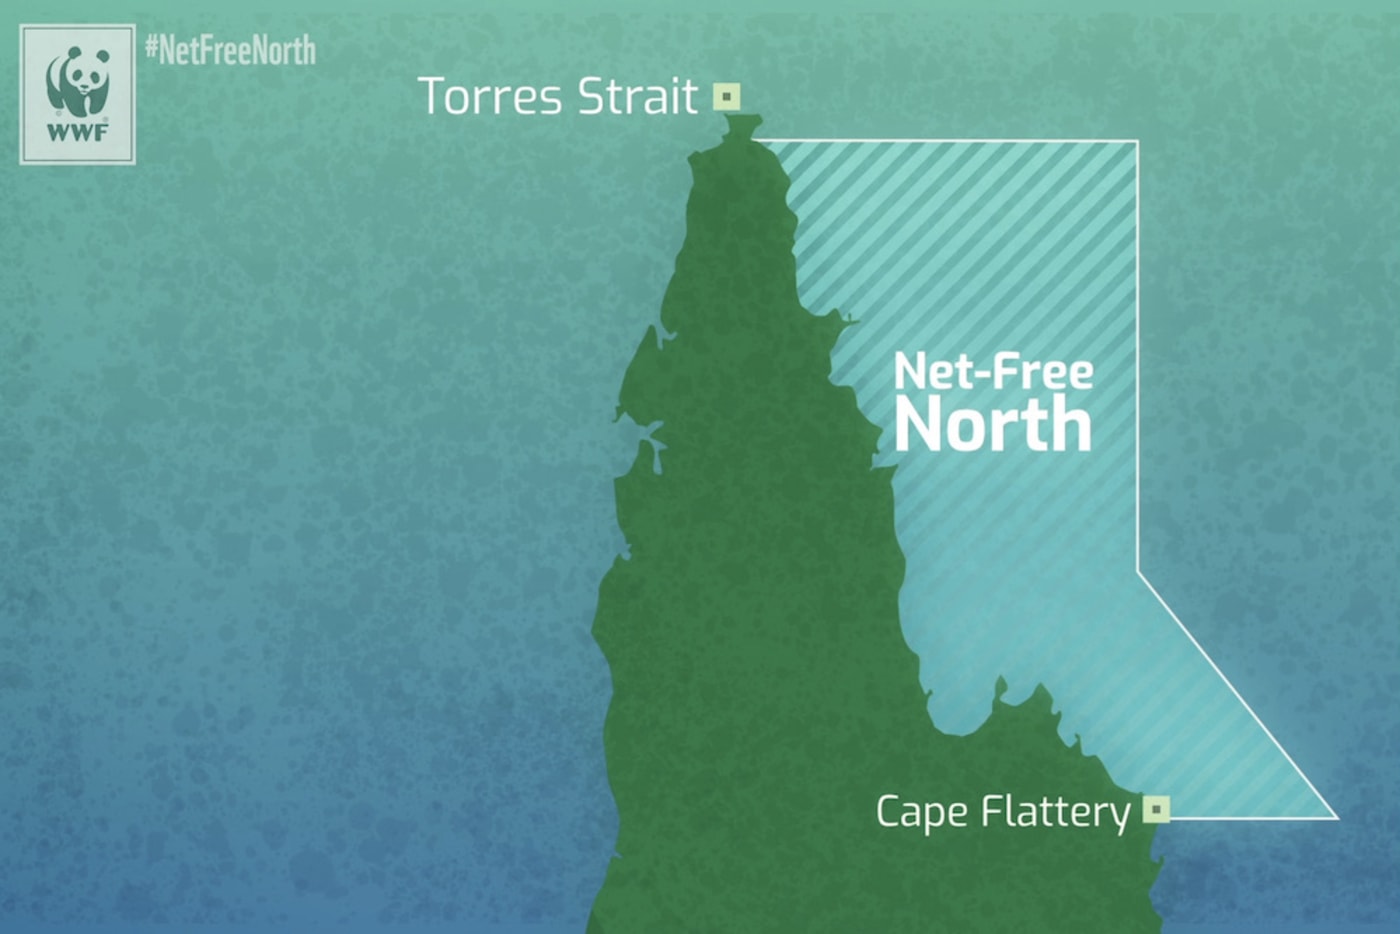 Map of the Net Free North region